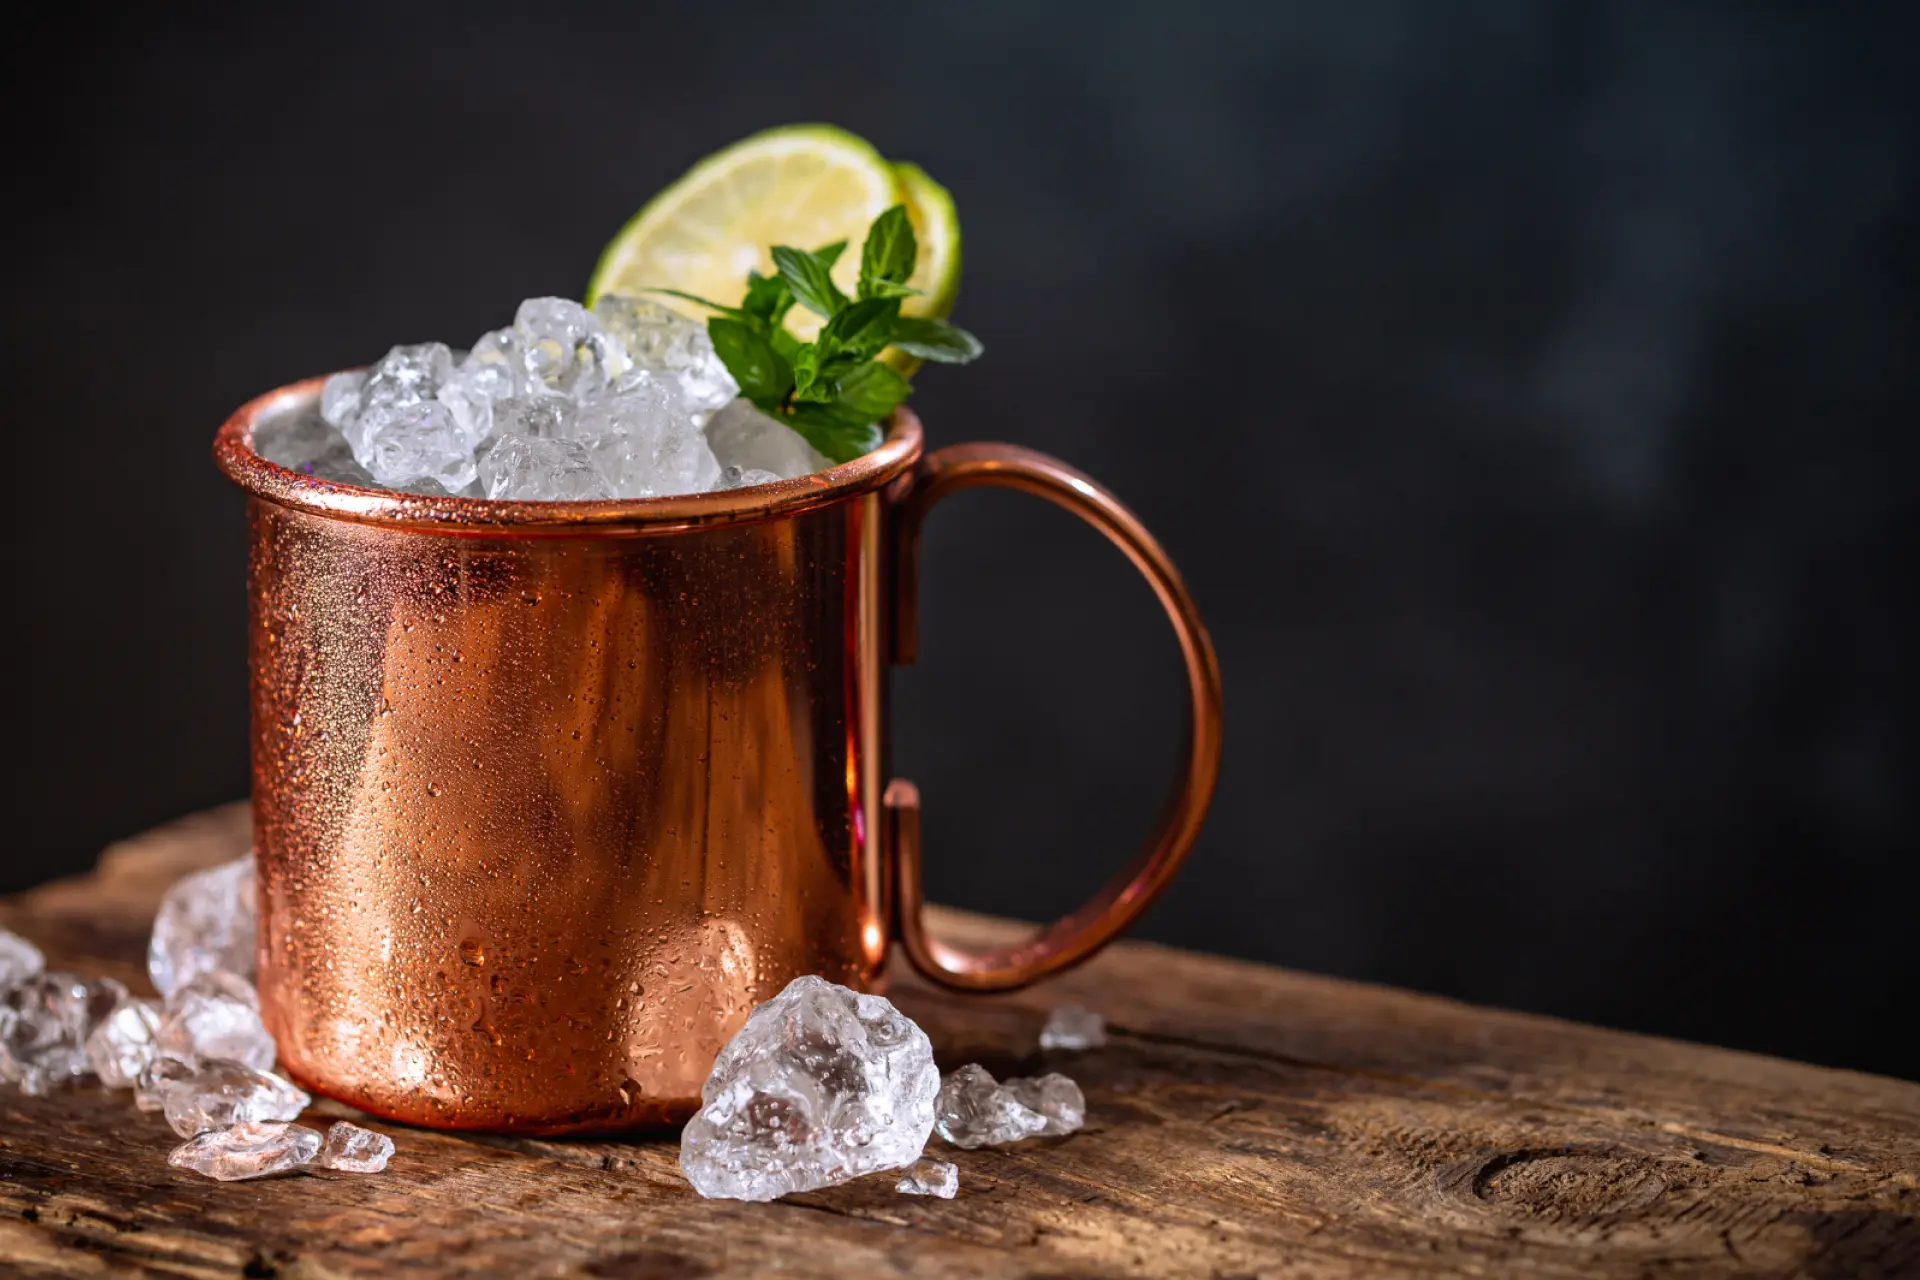 Moscow mule.